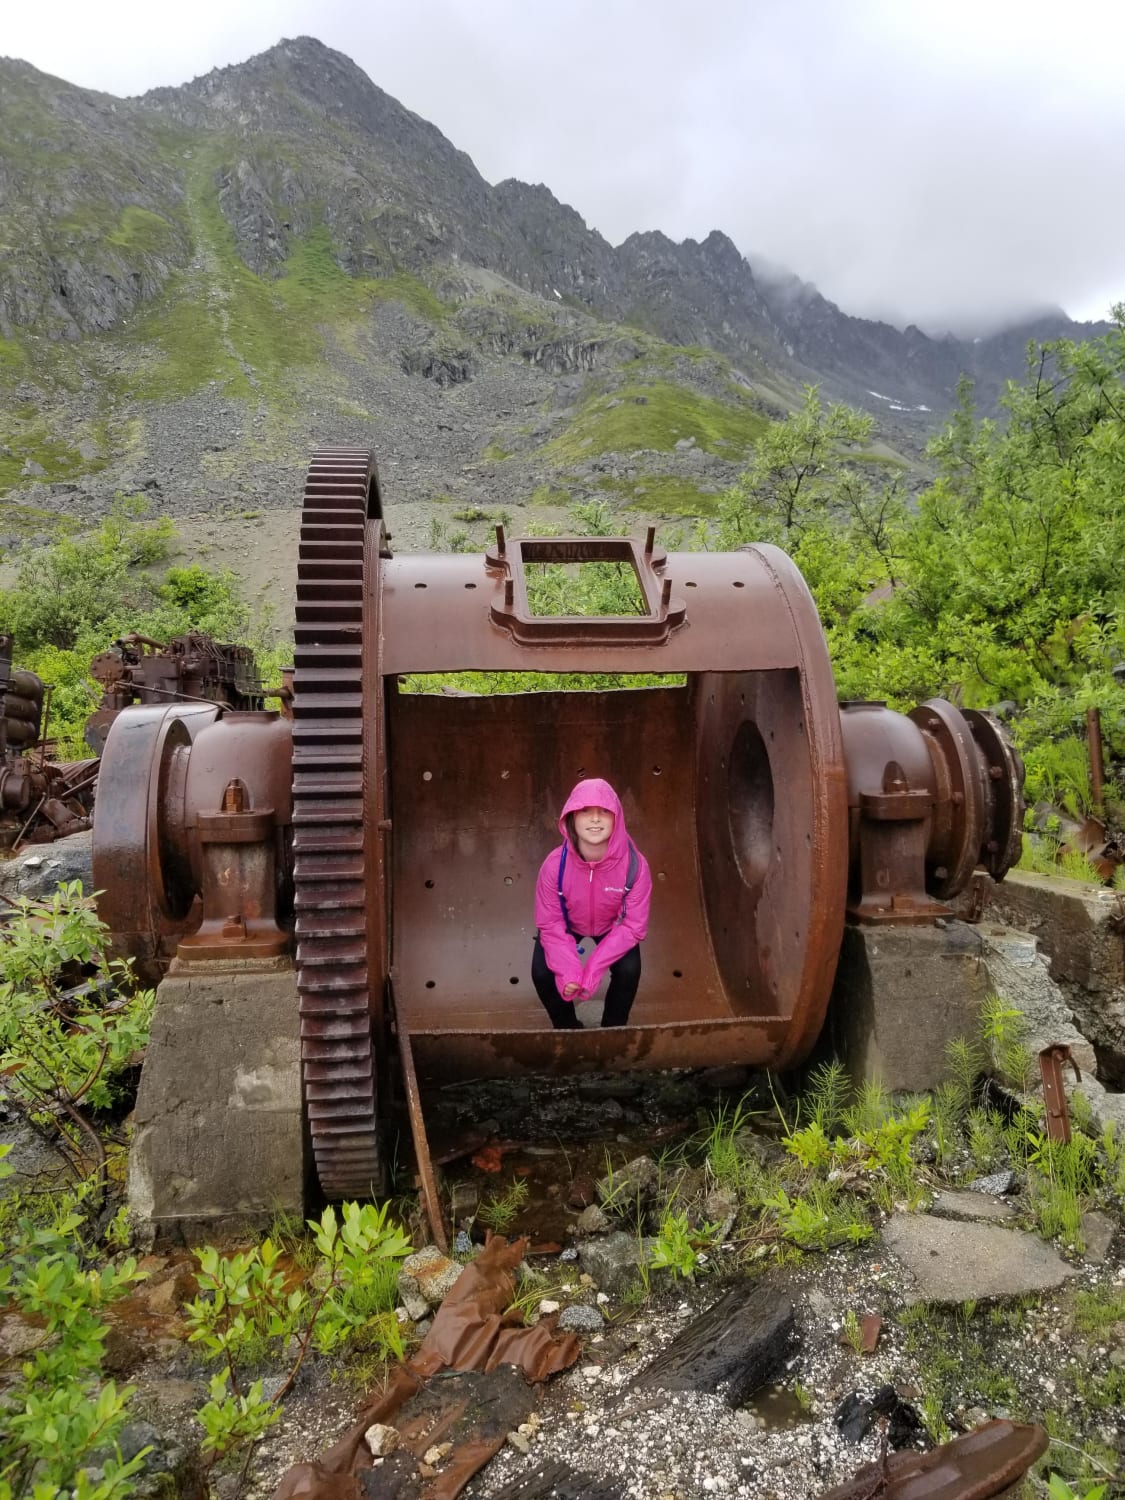 Fern Mine Ruins in Hatcher Pass, Alaska. This is very near to the beginning of the trail to climb to the Bomber wreckage that I shared previously. Links in comments to more photos and mining history.